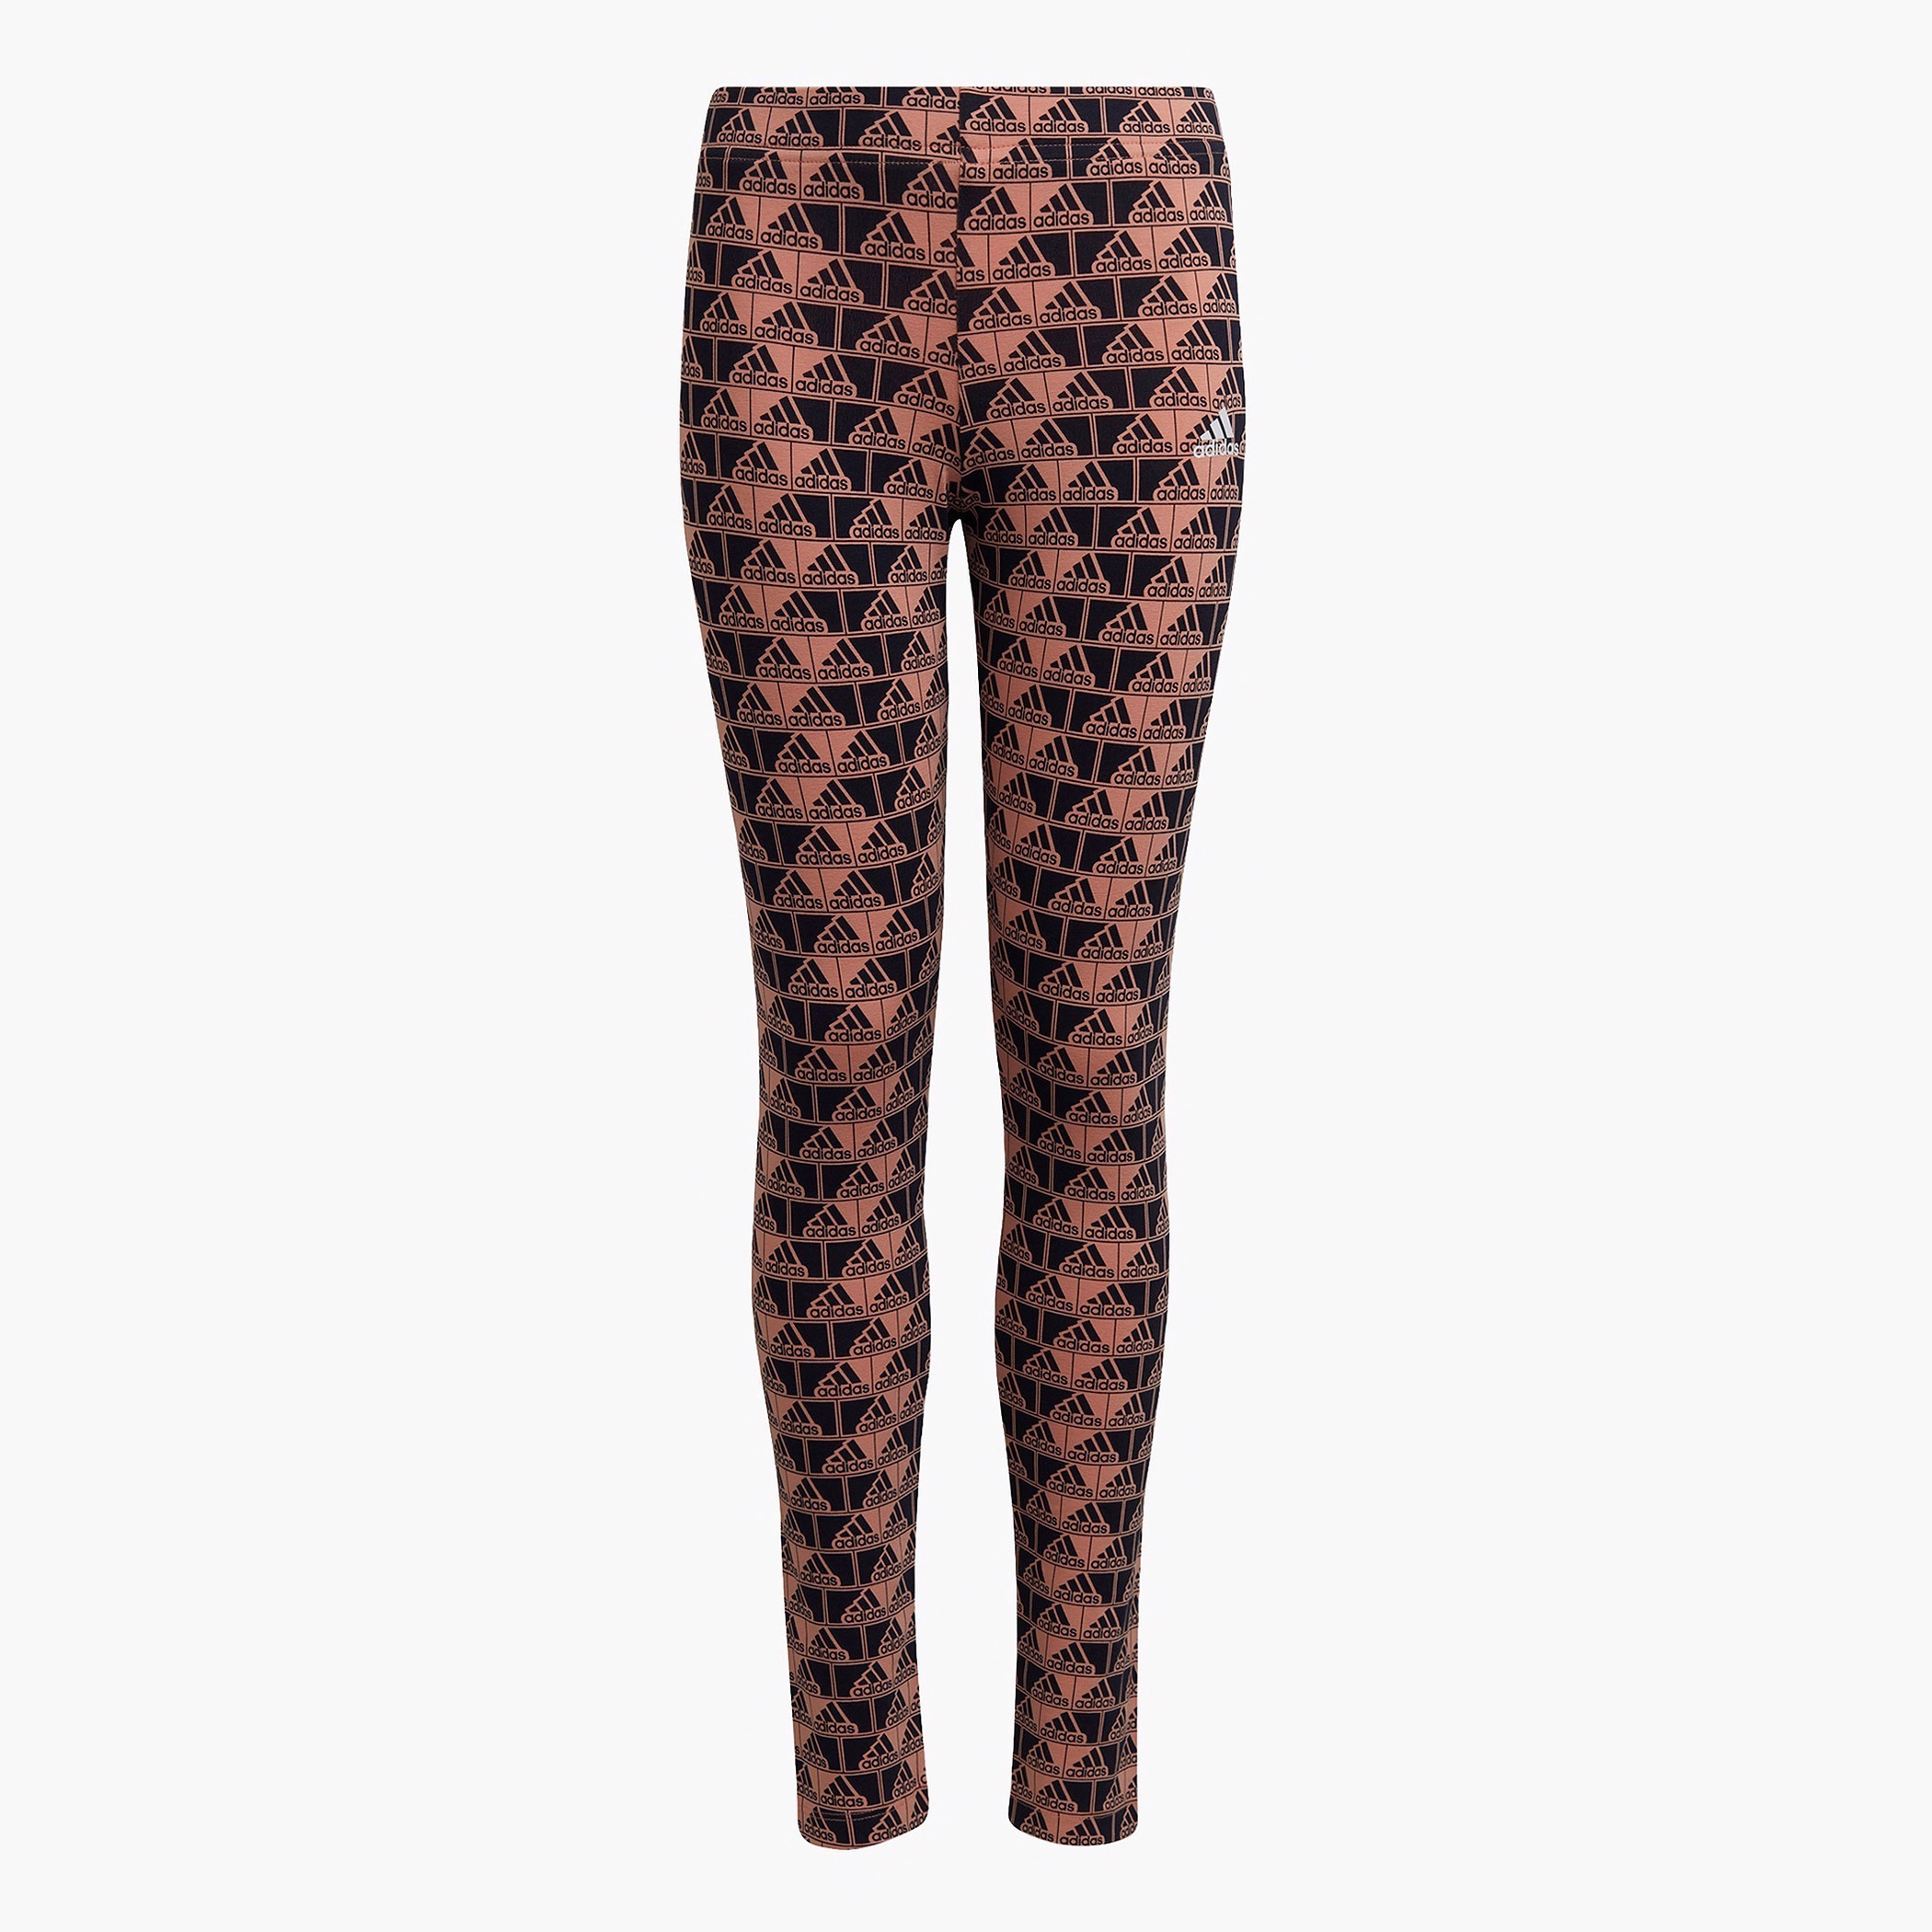 Discover more than 254 adidas all over print leggings latest